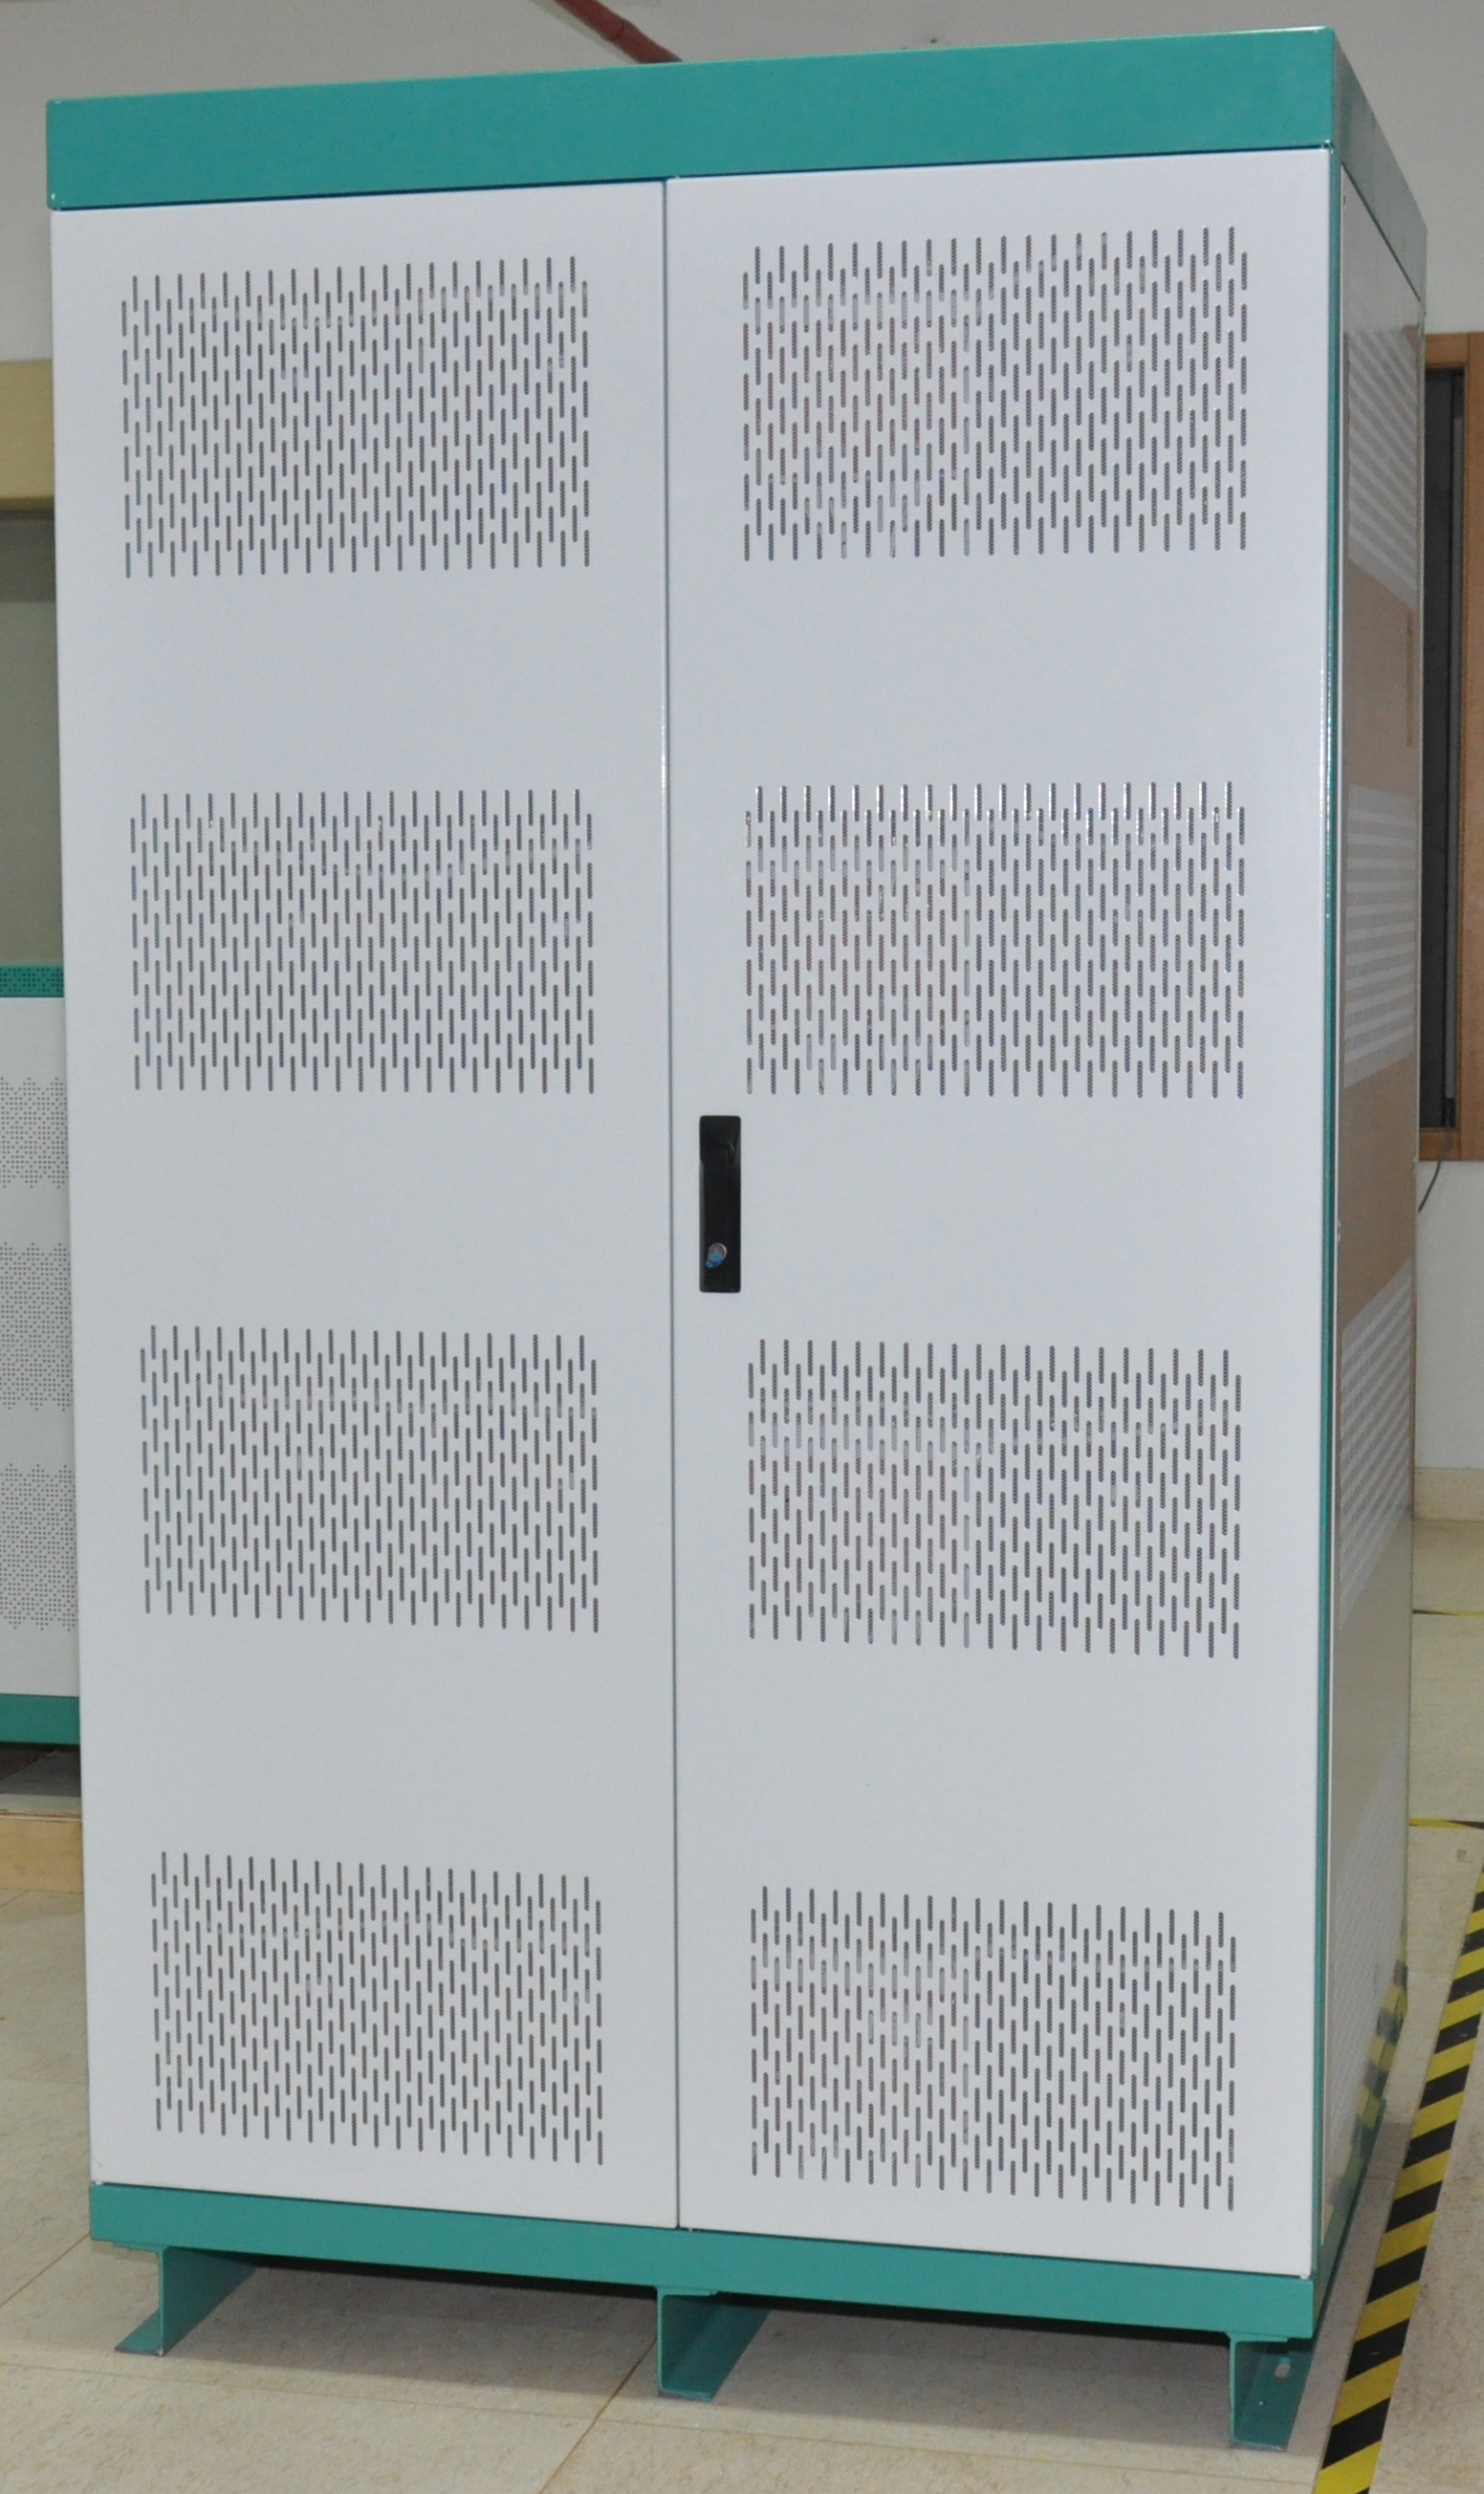 Energy Storage System 168kwh Lithium Lifepo4 Battery Cabinet 600V 280Ah Solar Battery with BMS & LCD display